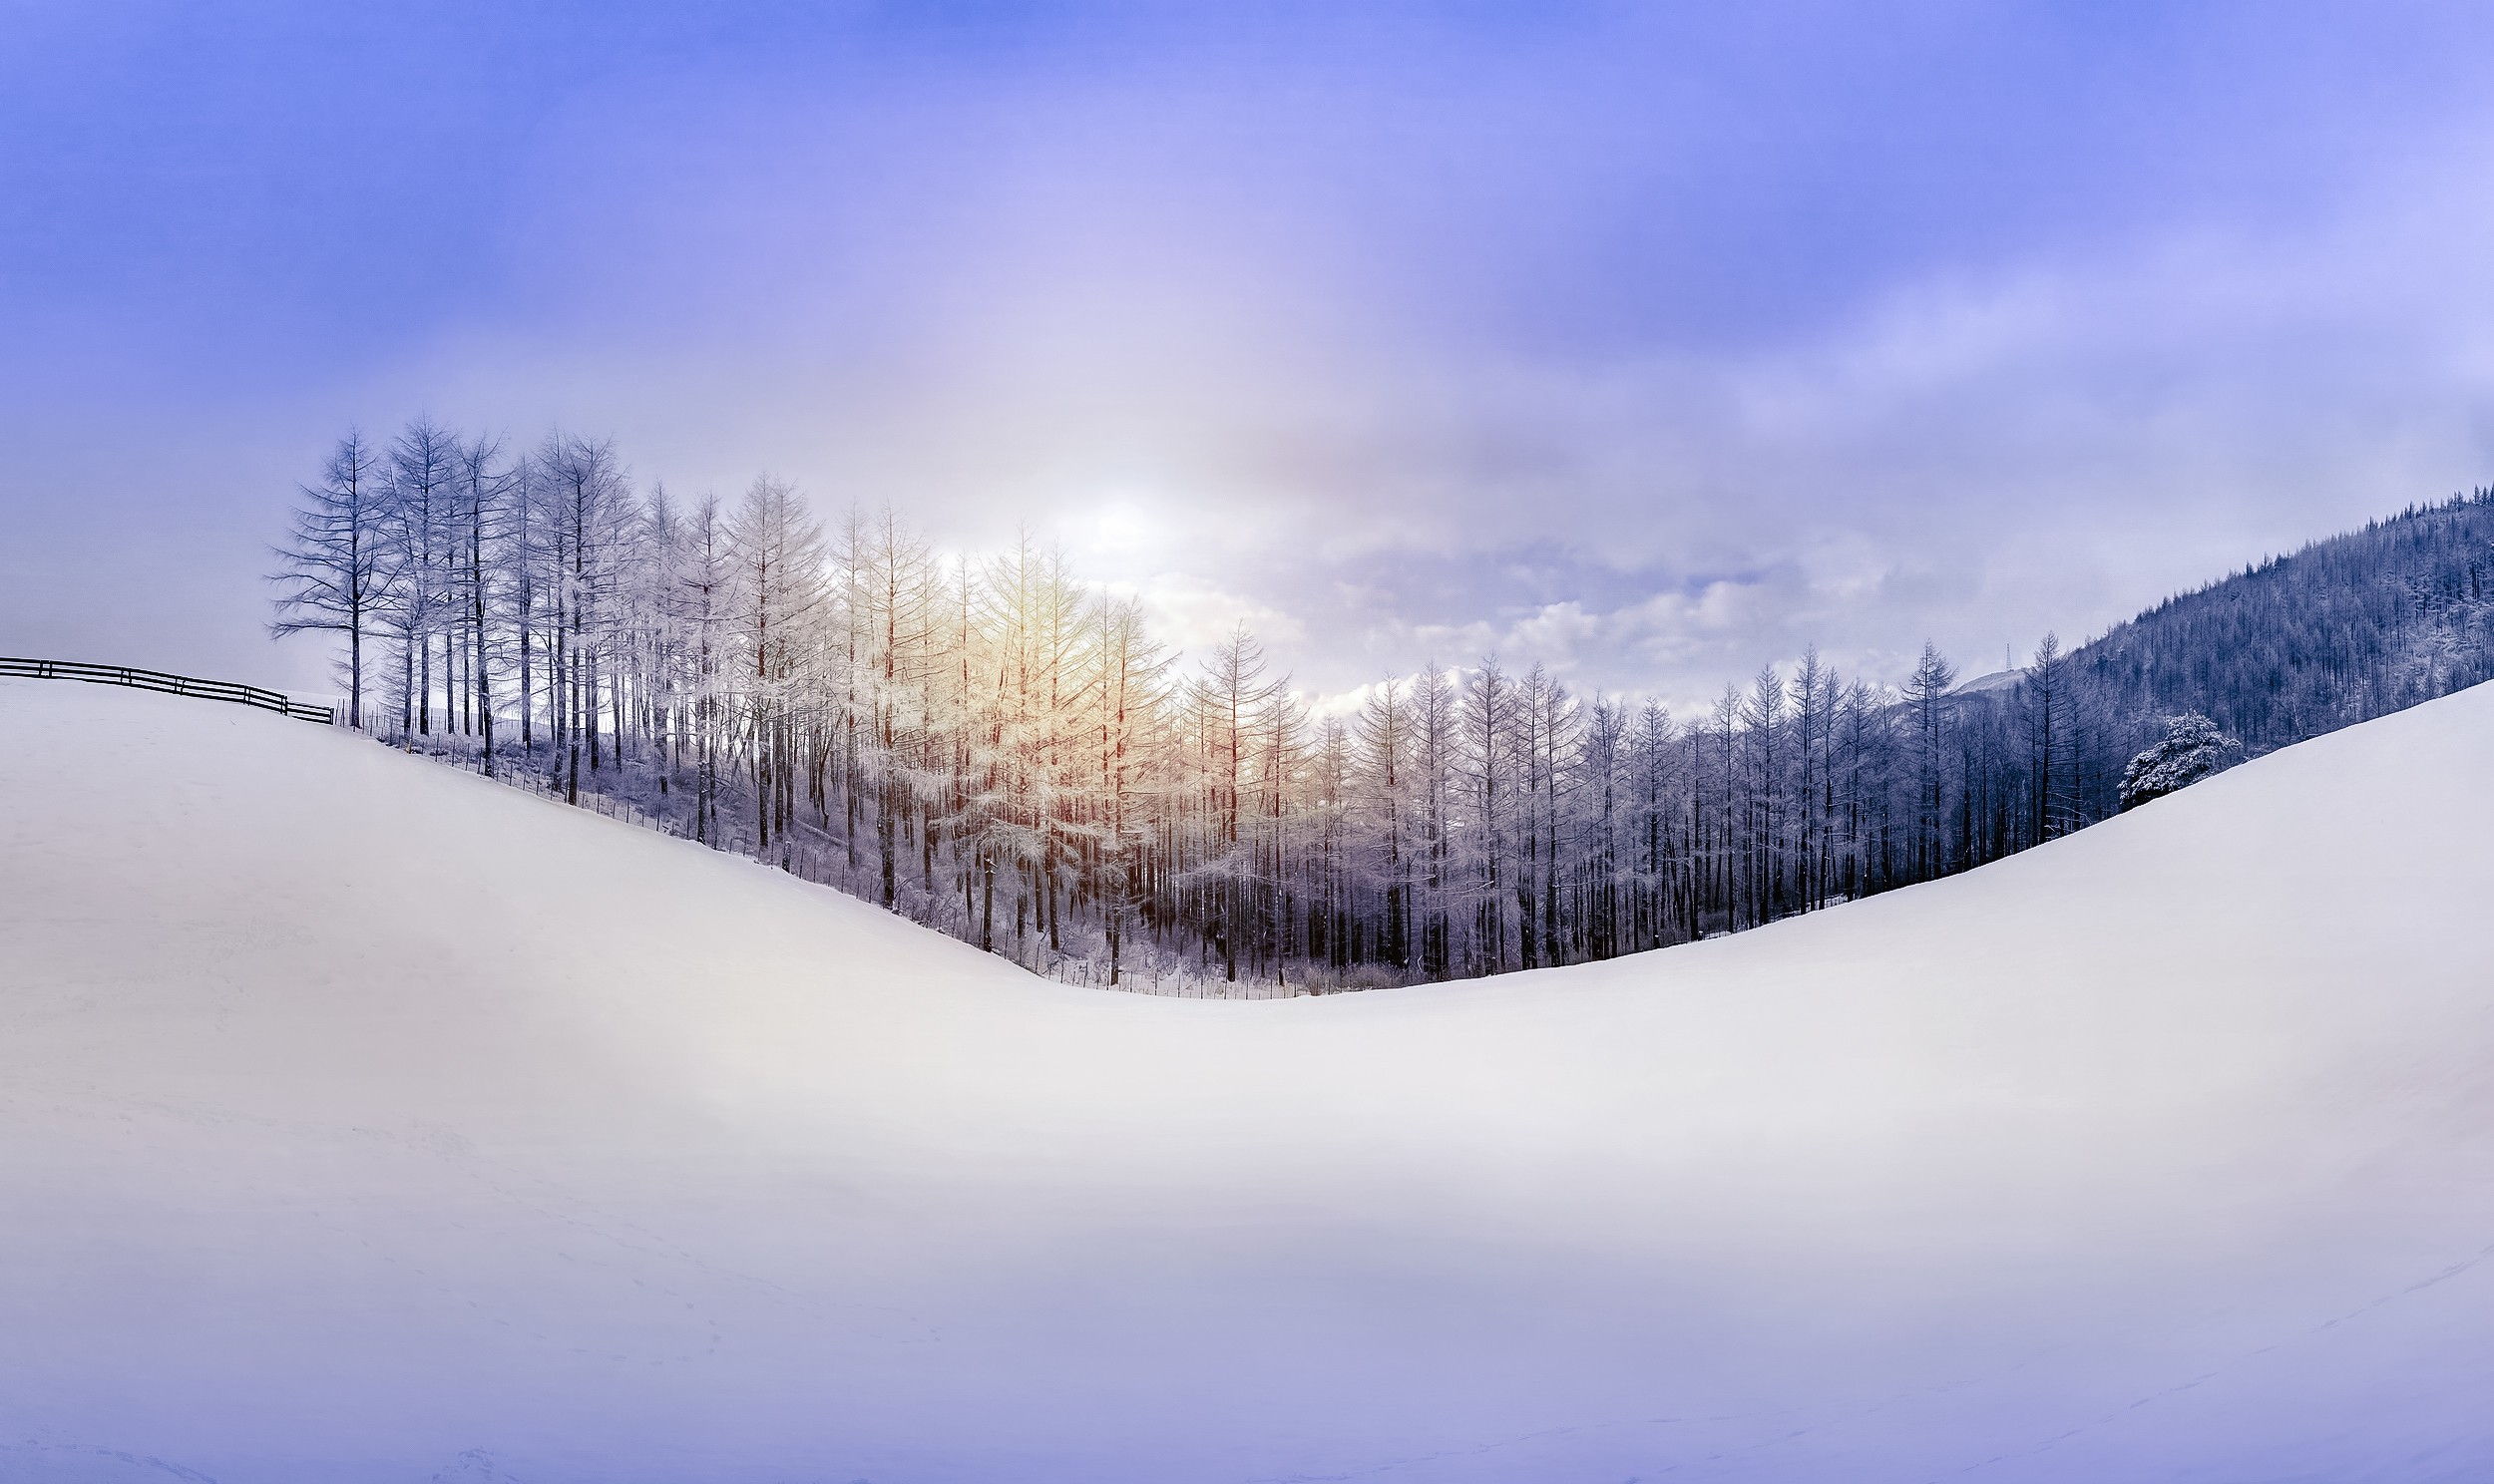 Earth Winter HD Wallpaper | Background Image